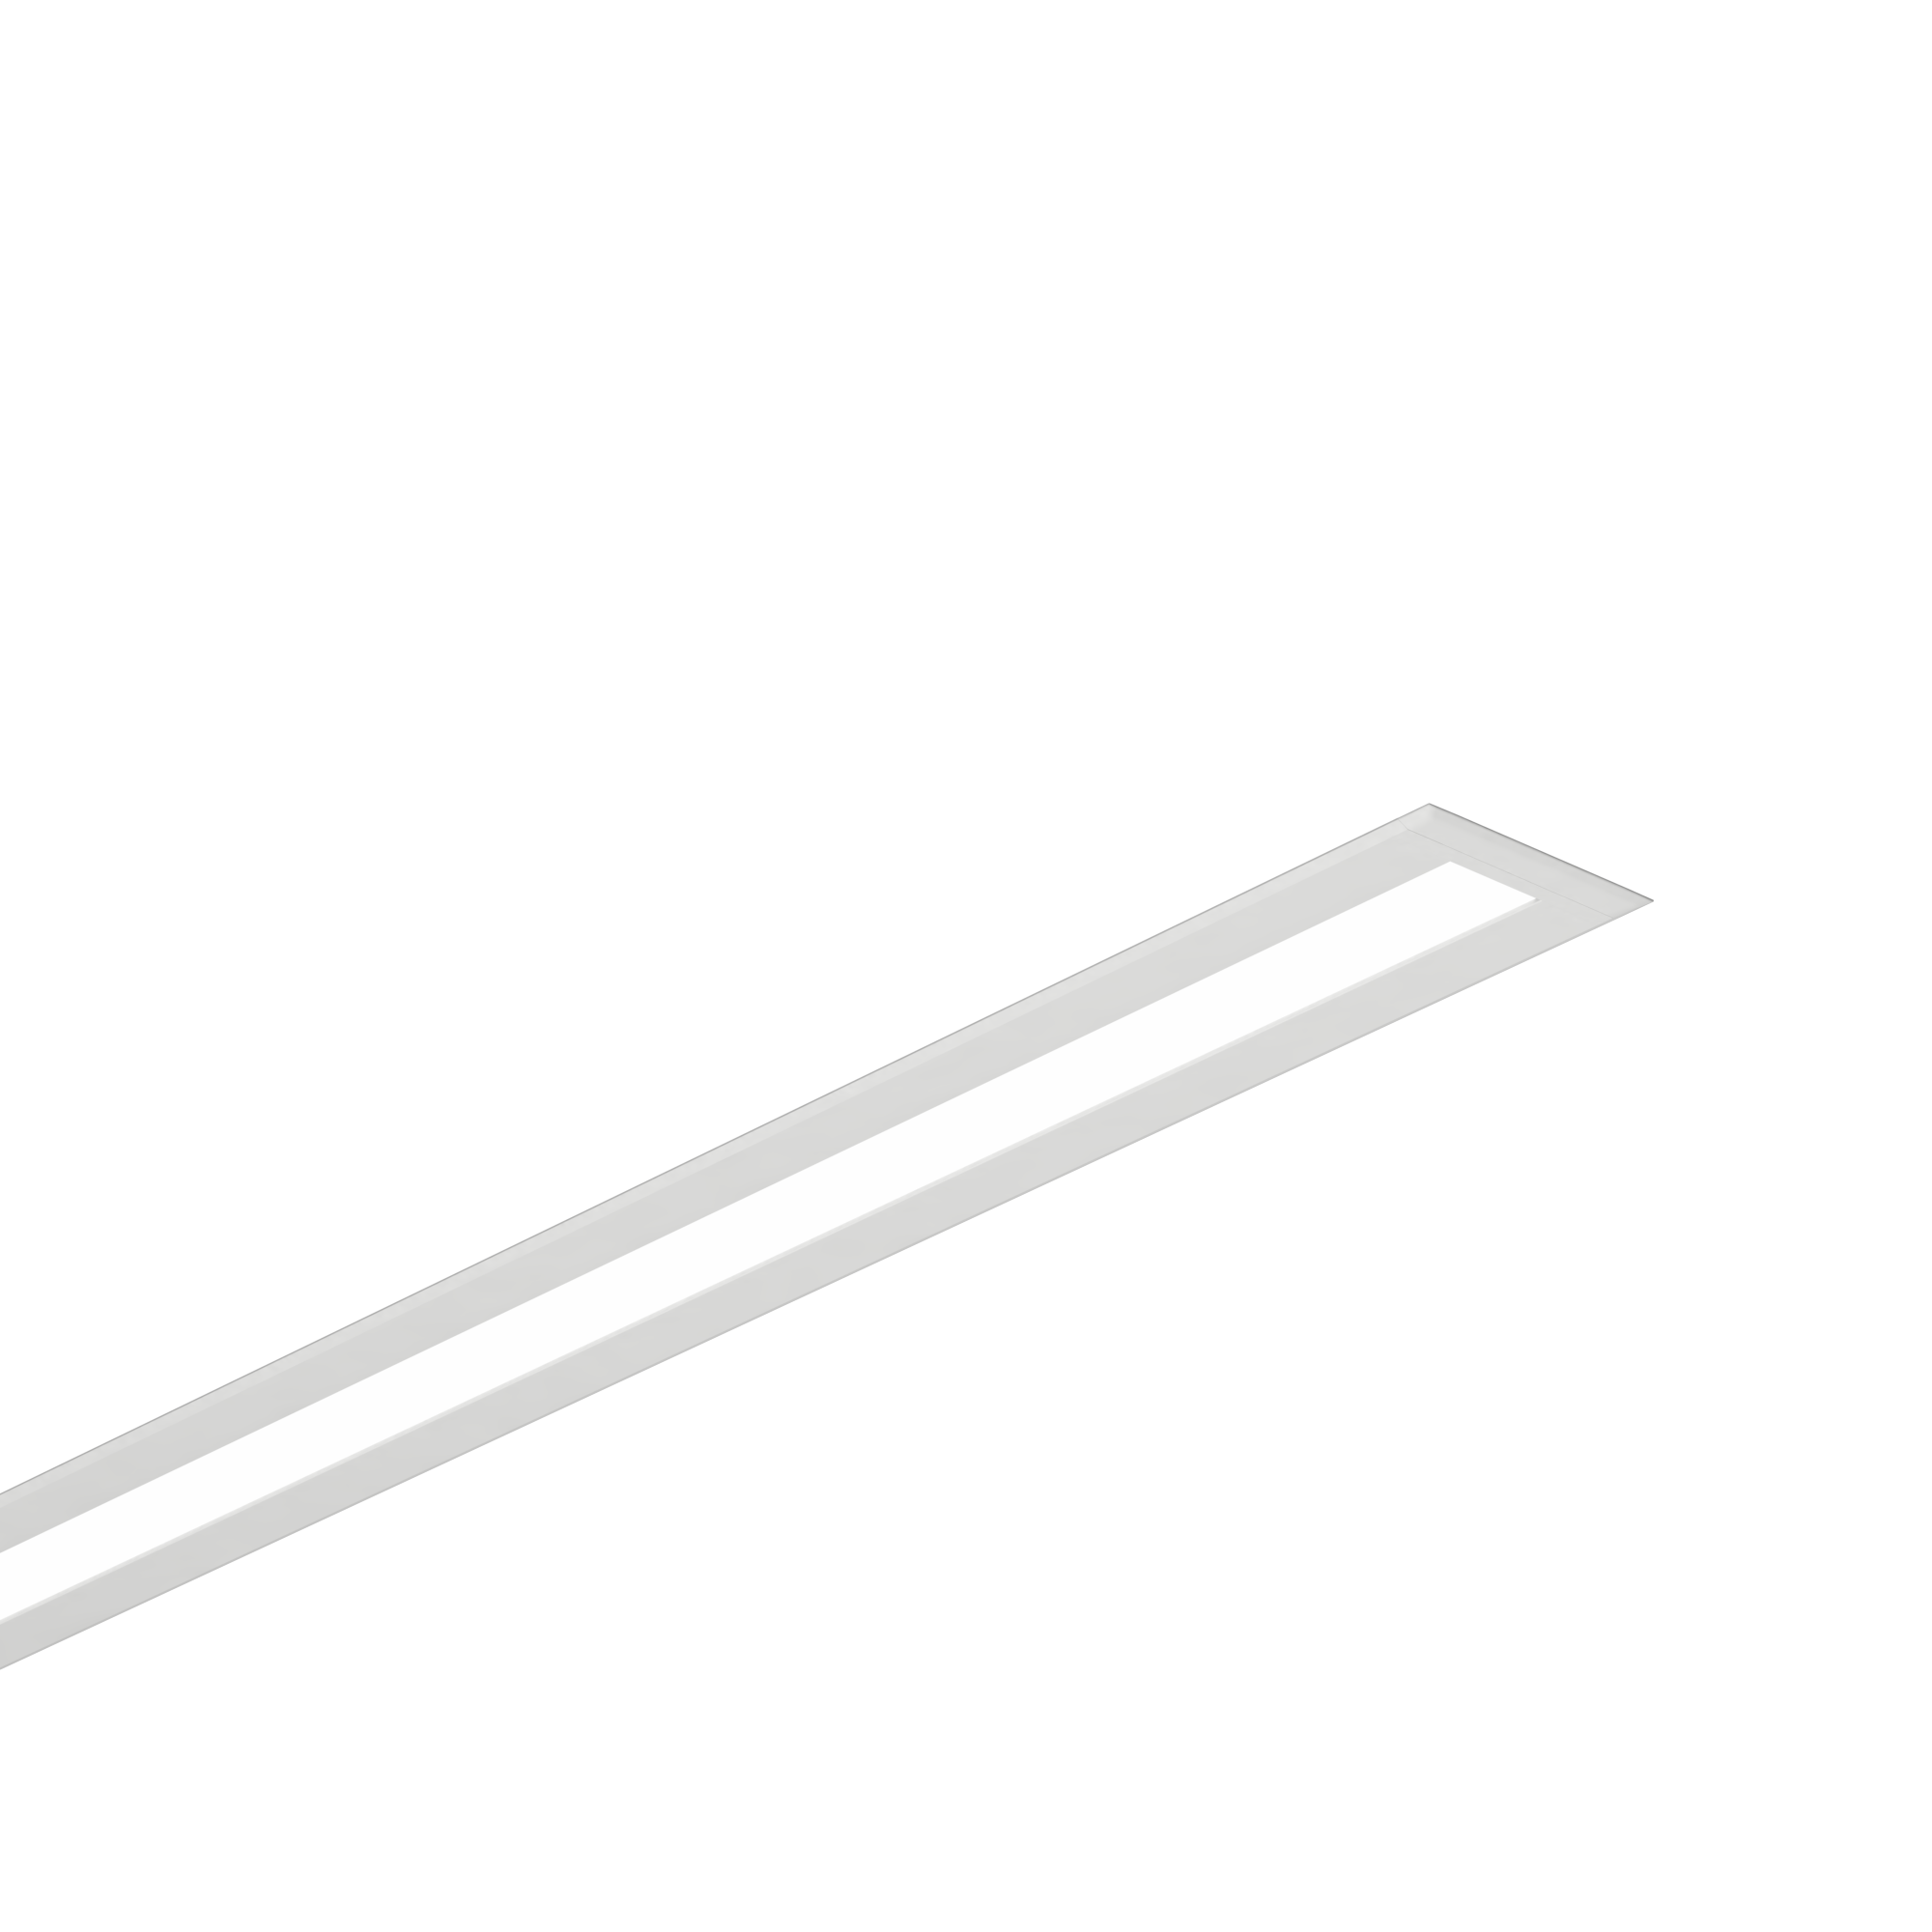 0.95” Ultra-Compact Slot LED Linear
NANOSlot Recessed is 0.95” recessed slot LED linear light fixture, bringing SmartBeam® capabilities to a graphic scale that complements architectural space. NANOSlot has mounting options for ceiling systems, drywall, millwork, metal, and custom configurations. The NANOSlot 0.95 range is designed to be specification-grade with high lumen per foot, high CRI, and circadian options.

 

Square Flanged Profile: 2” (50.8mm) x 0.95” (24mm)